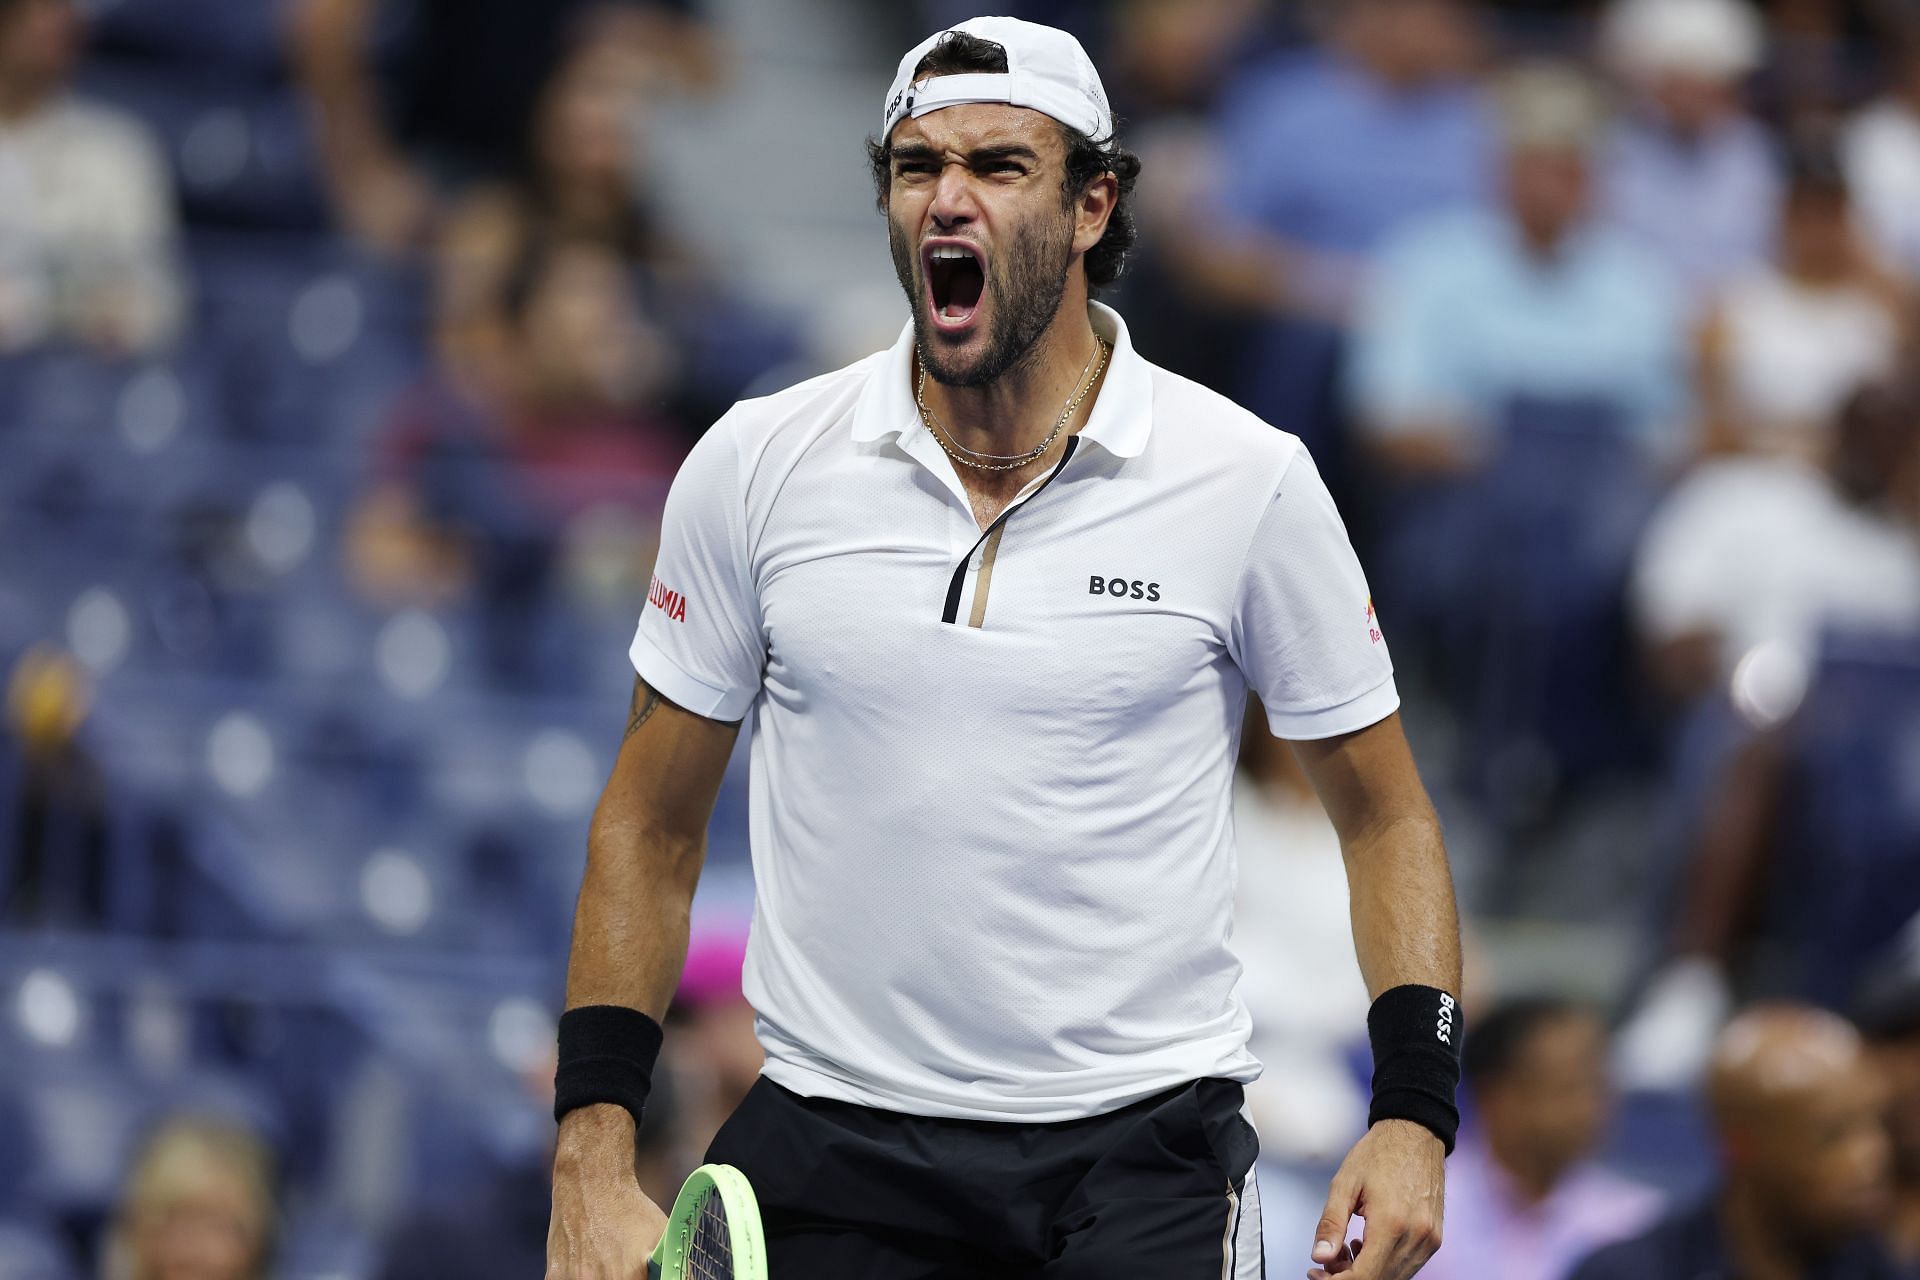 Matteo Berrettini reached the quarterfinals of the 2022 US Open